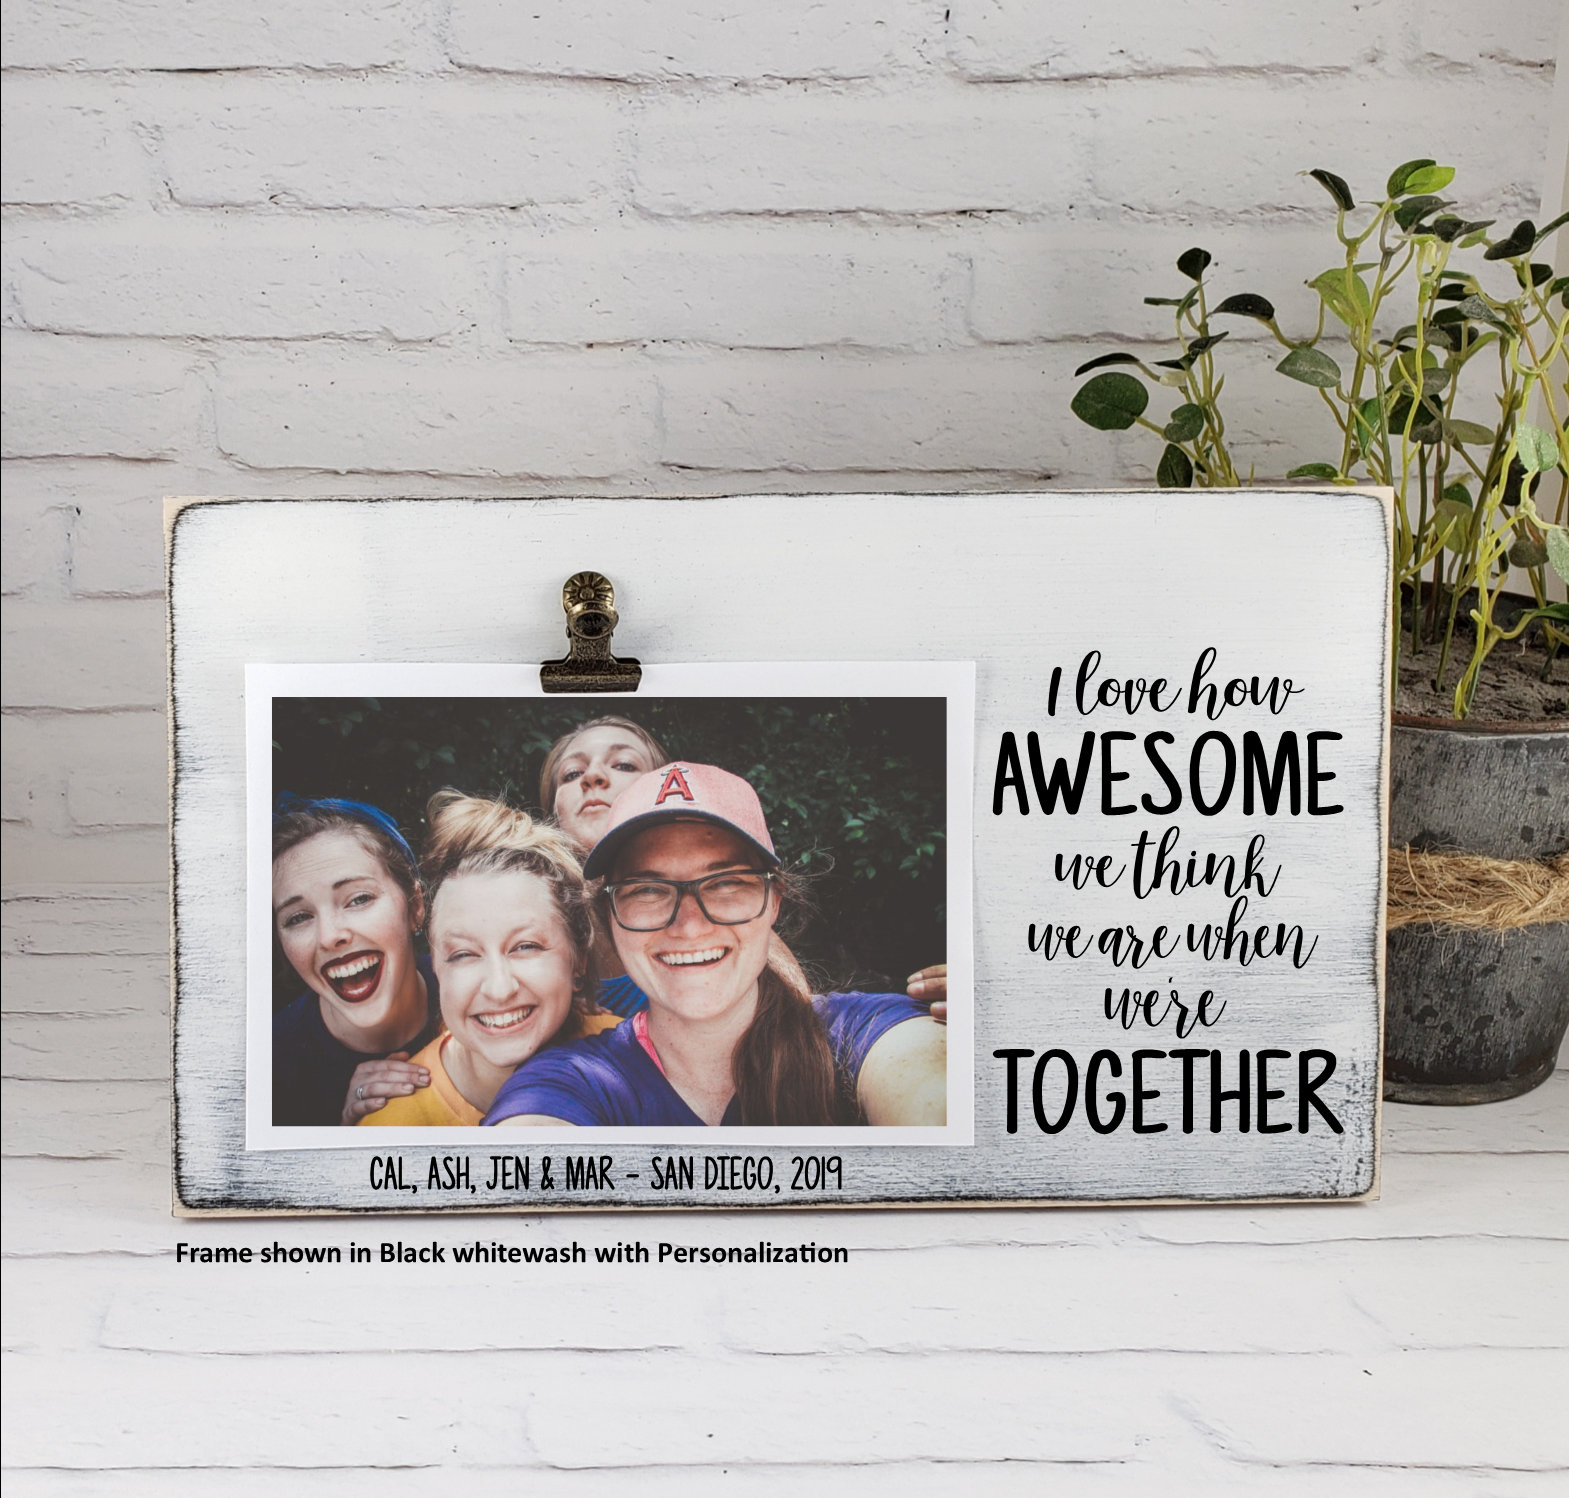 I Love Lucy Best Friends 4x6 Picture Frame